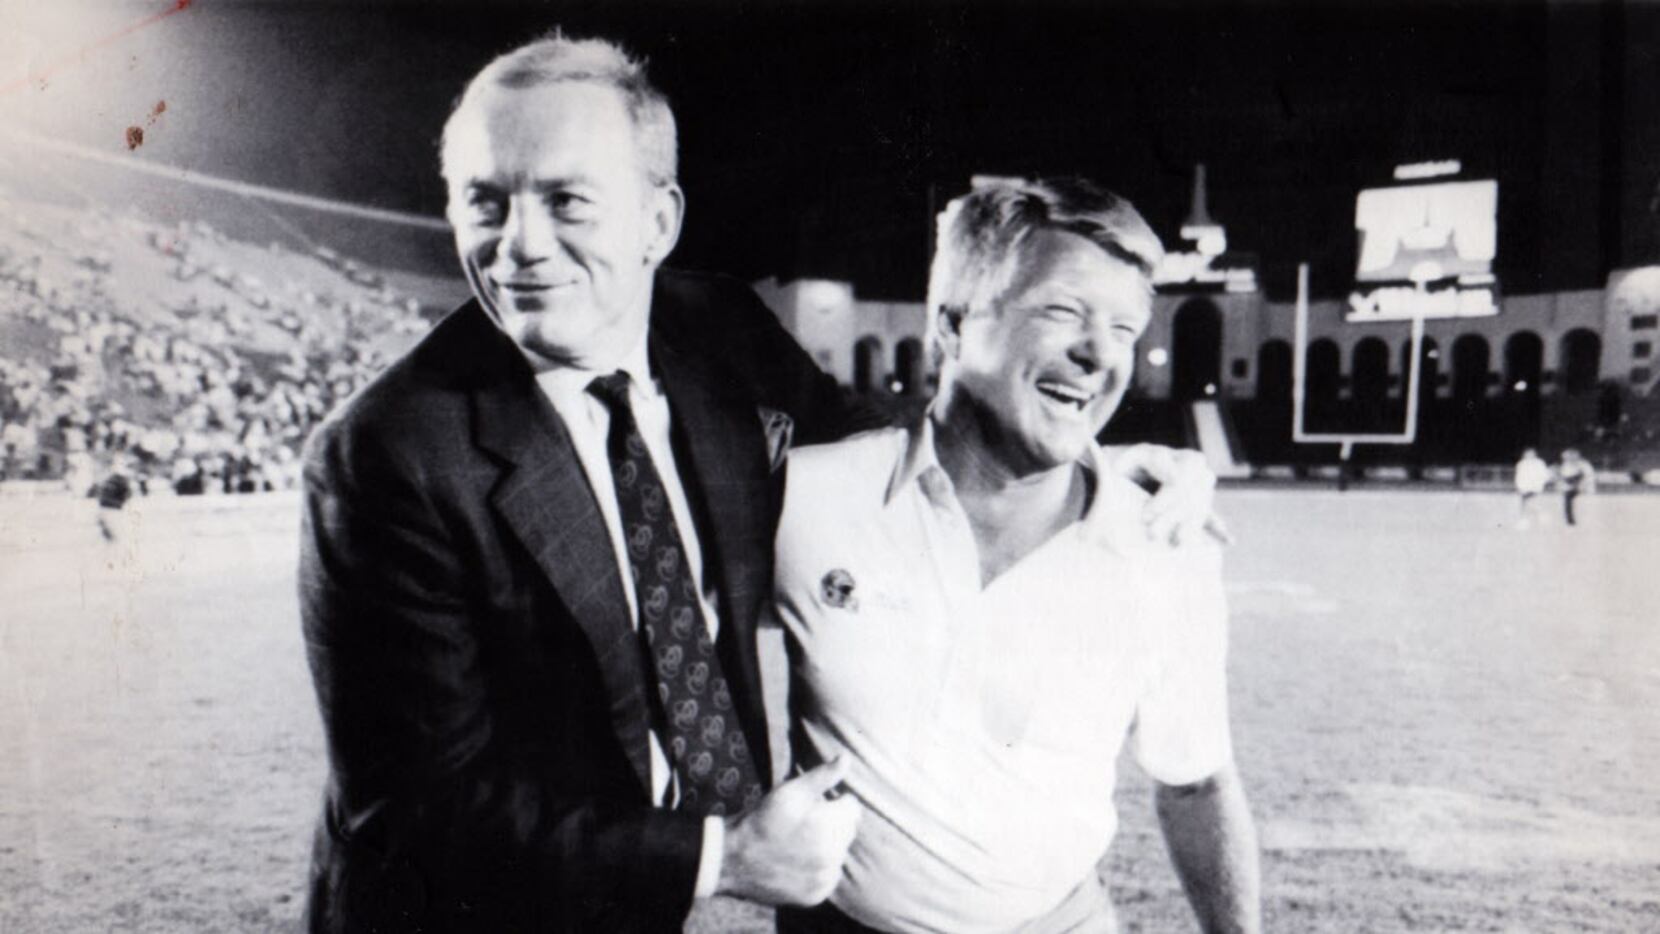 August 19, 1989 - Dallas Cowboys owner Jerry Jones and coach Jimmy Johnson walk off the...